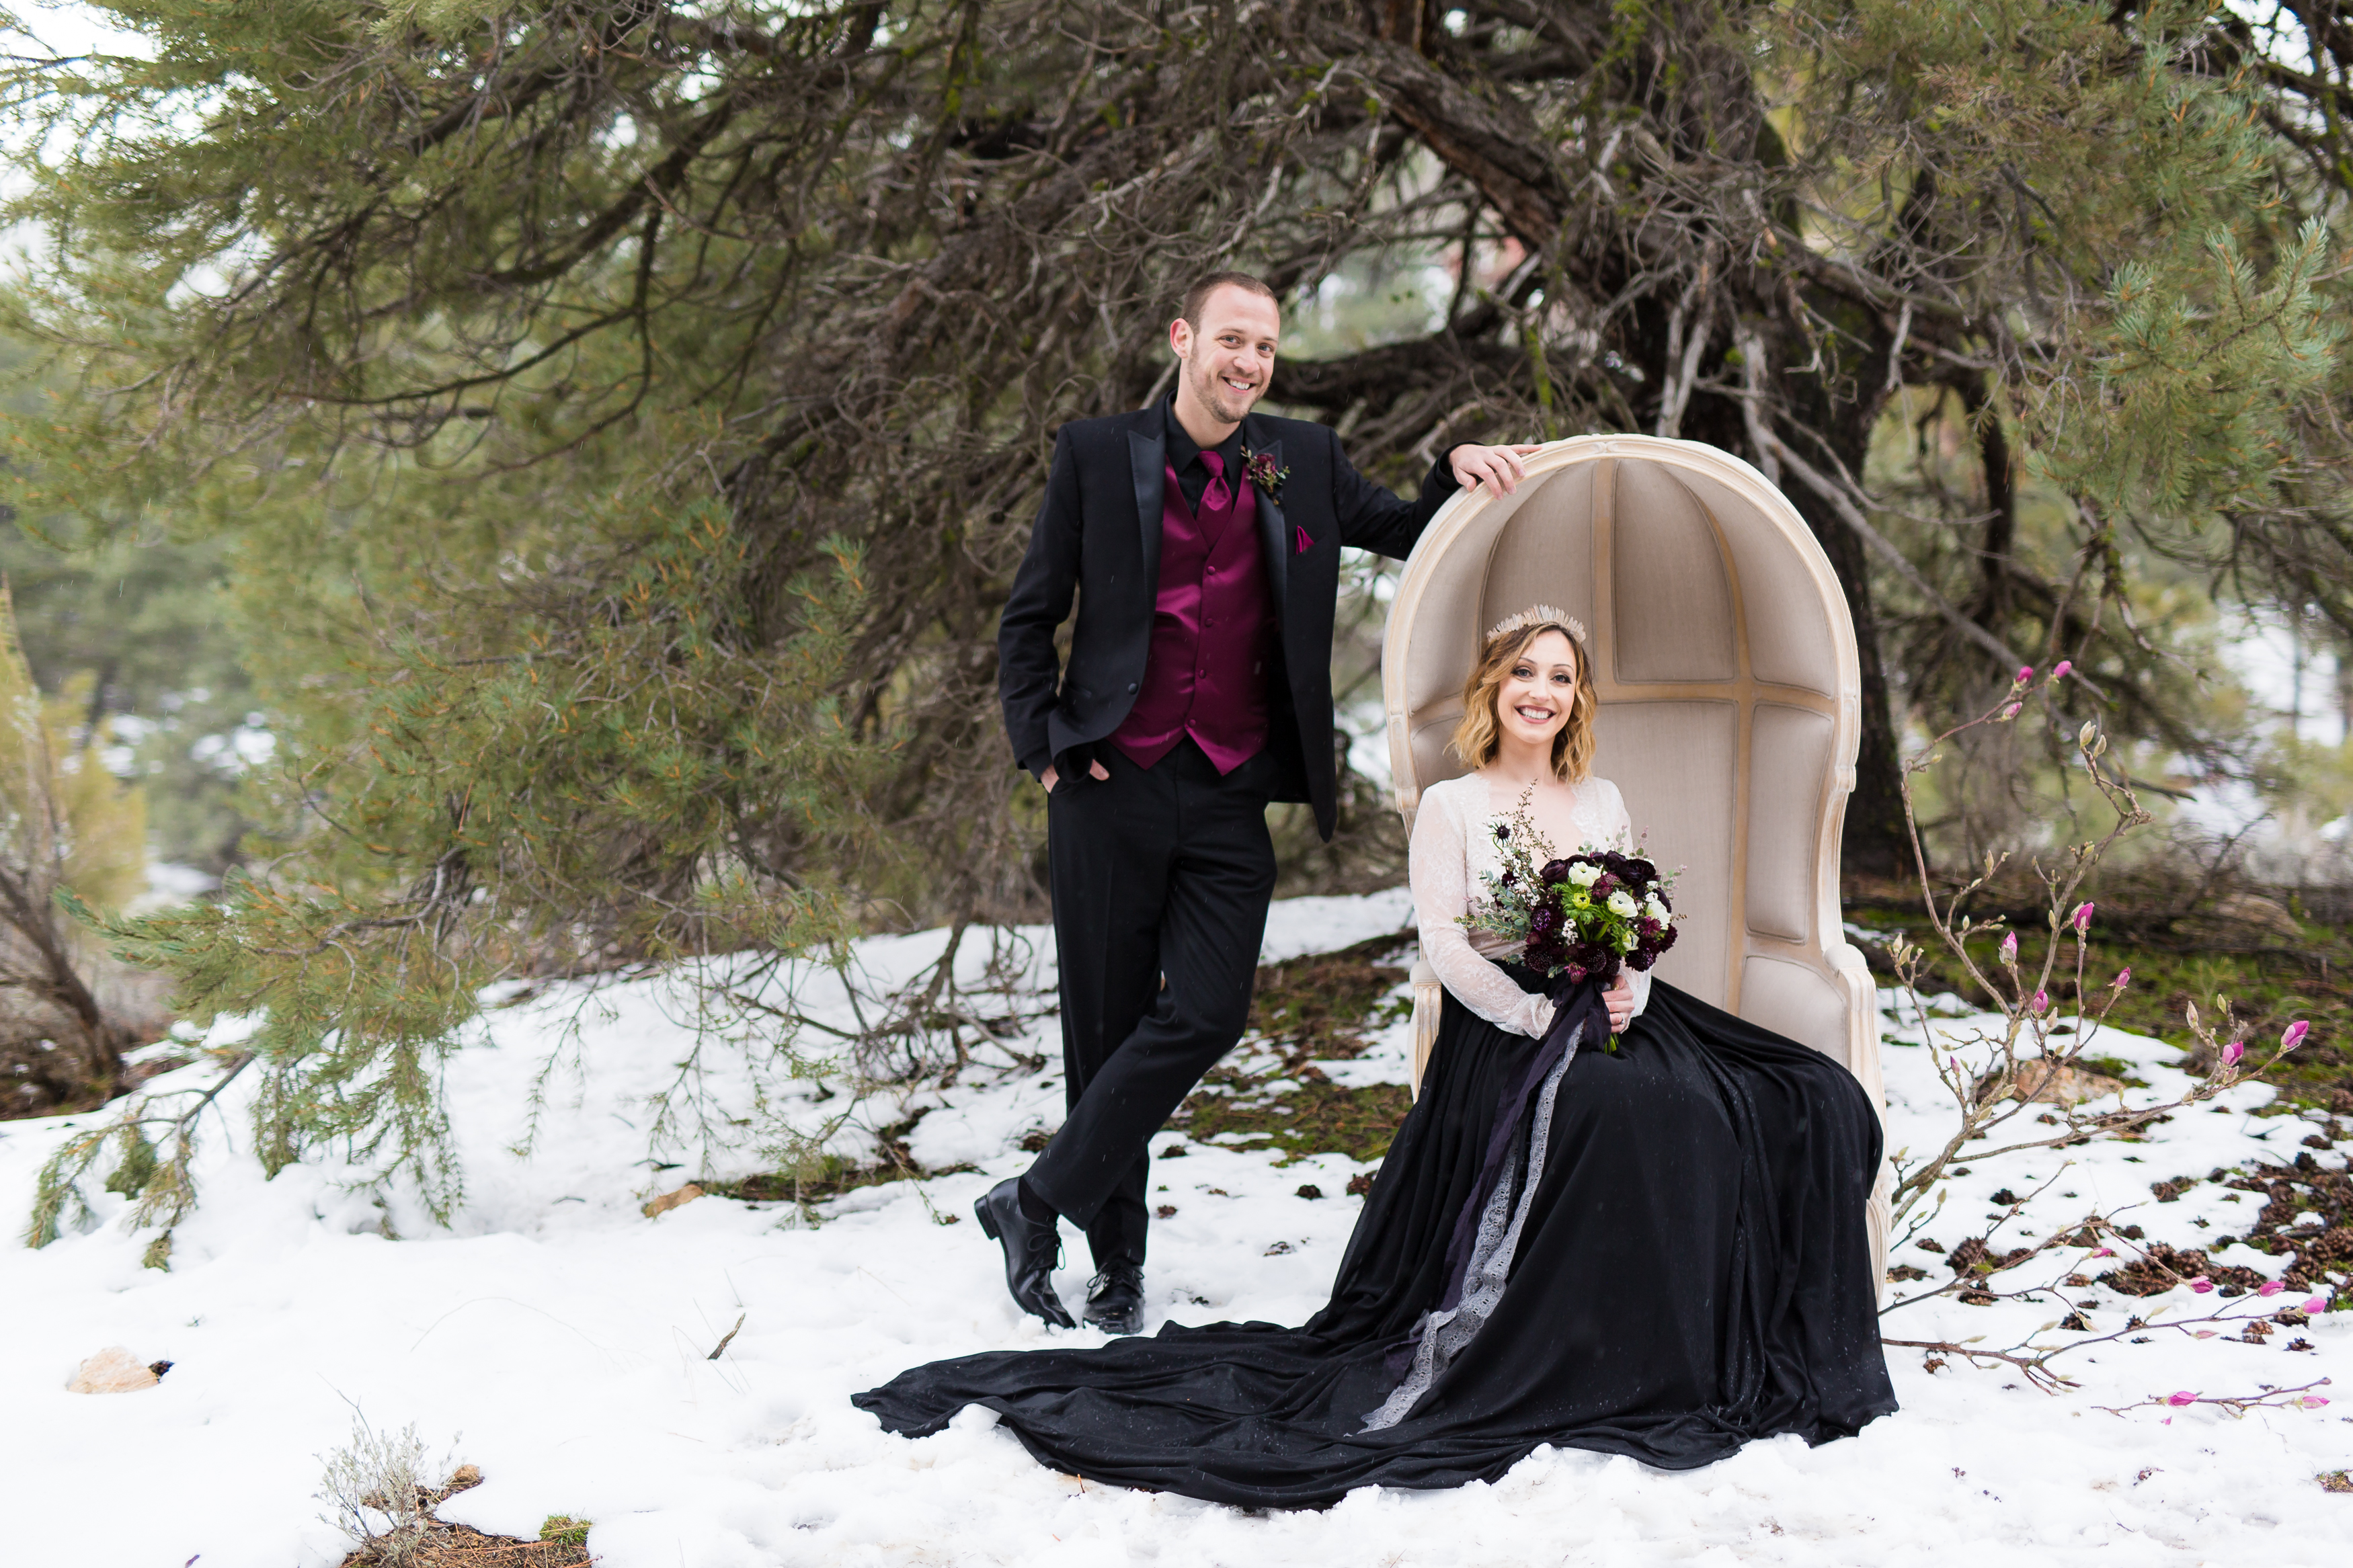 Husband leaning against chair while bride sits in snowy winterland